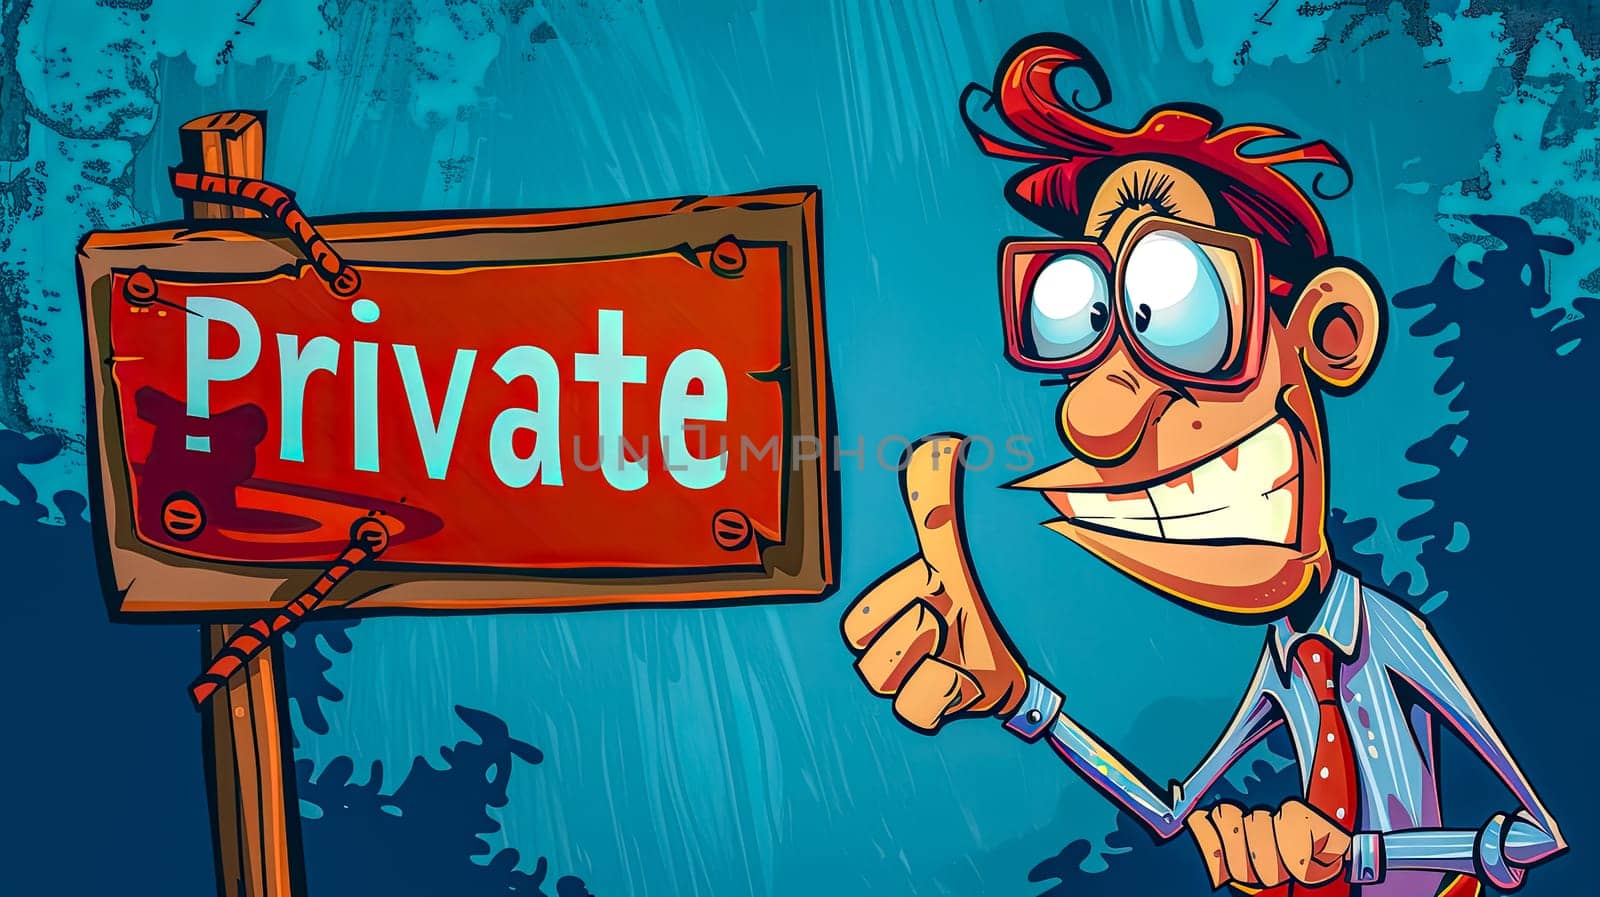 Colorful illustration of a cheerful cartoon man pointing at a private sign with his finger